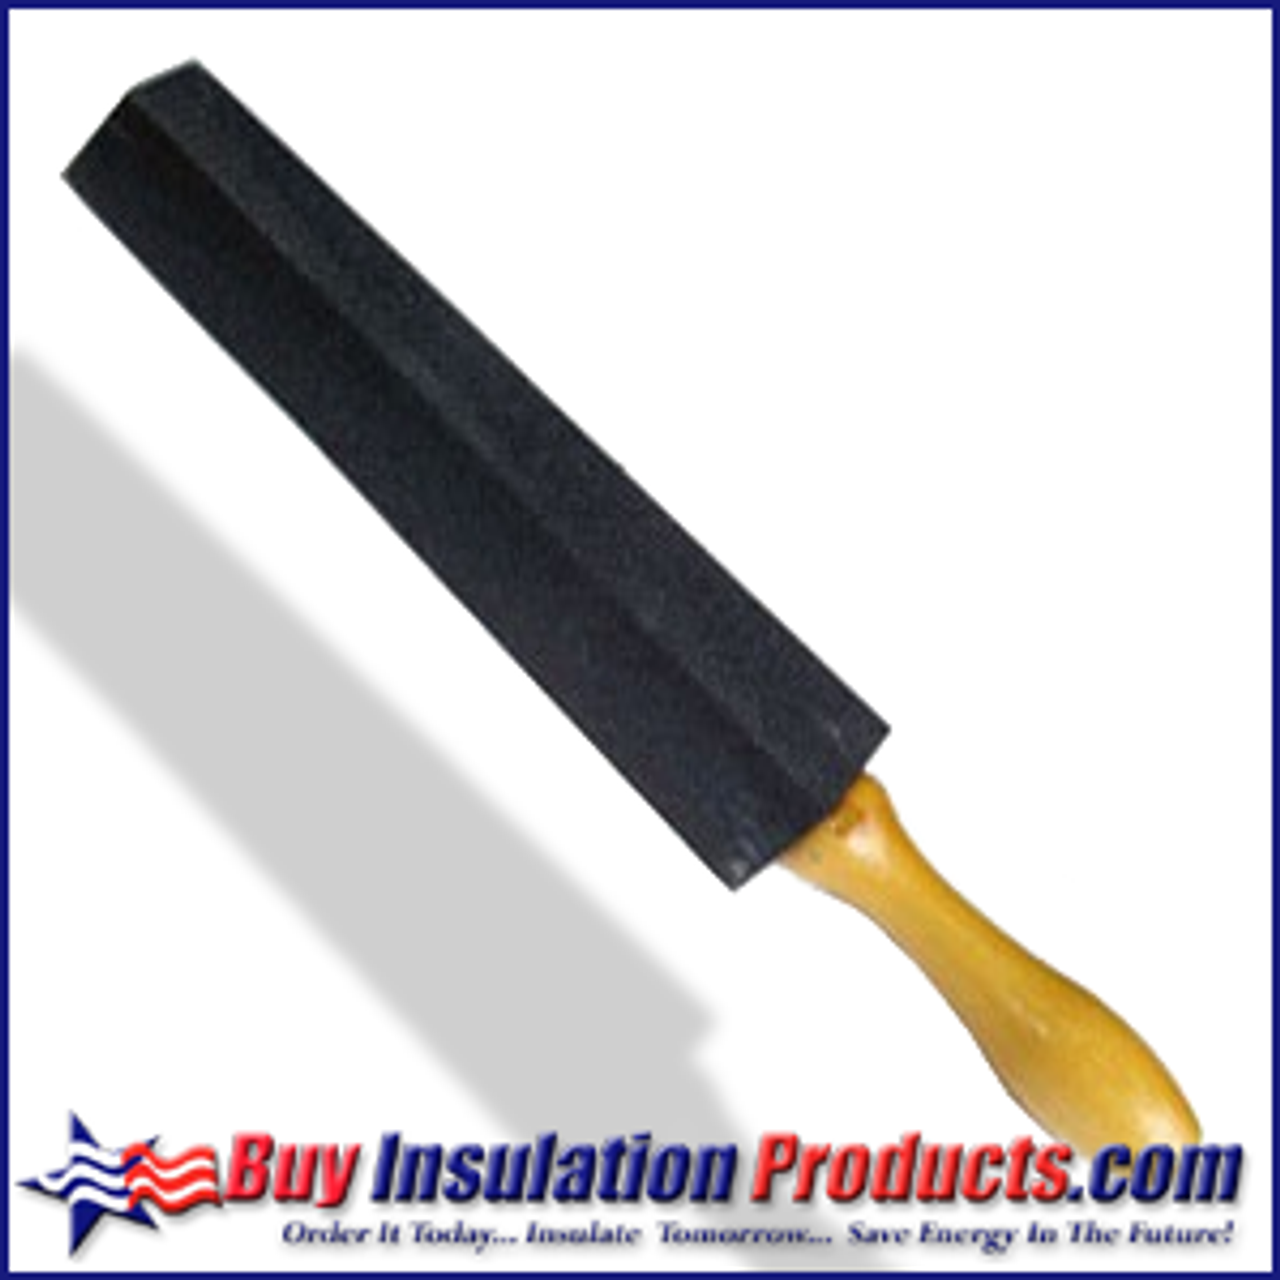 https://cdn11.bigcommerce.com/s-sjt5ll3s/images/stencil/1280x1280/products/160/919/Carborundum_Sharpening_Stone_with_Wood_Handle_14_inch__50186.1484778036.png?c=2